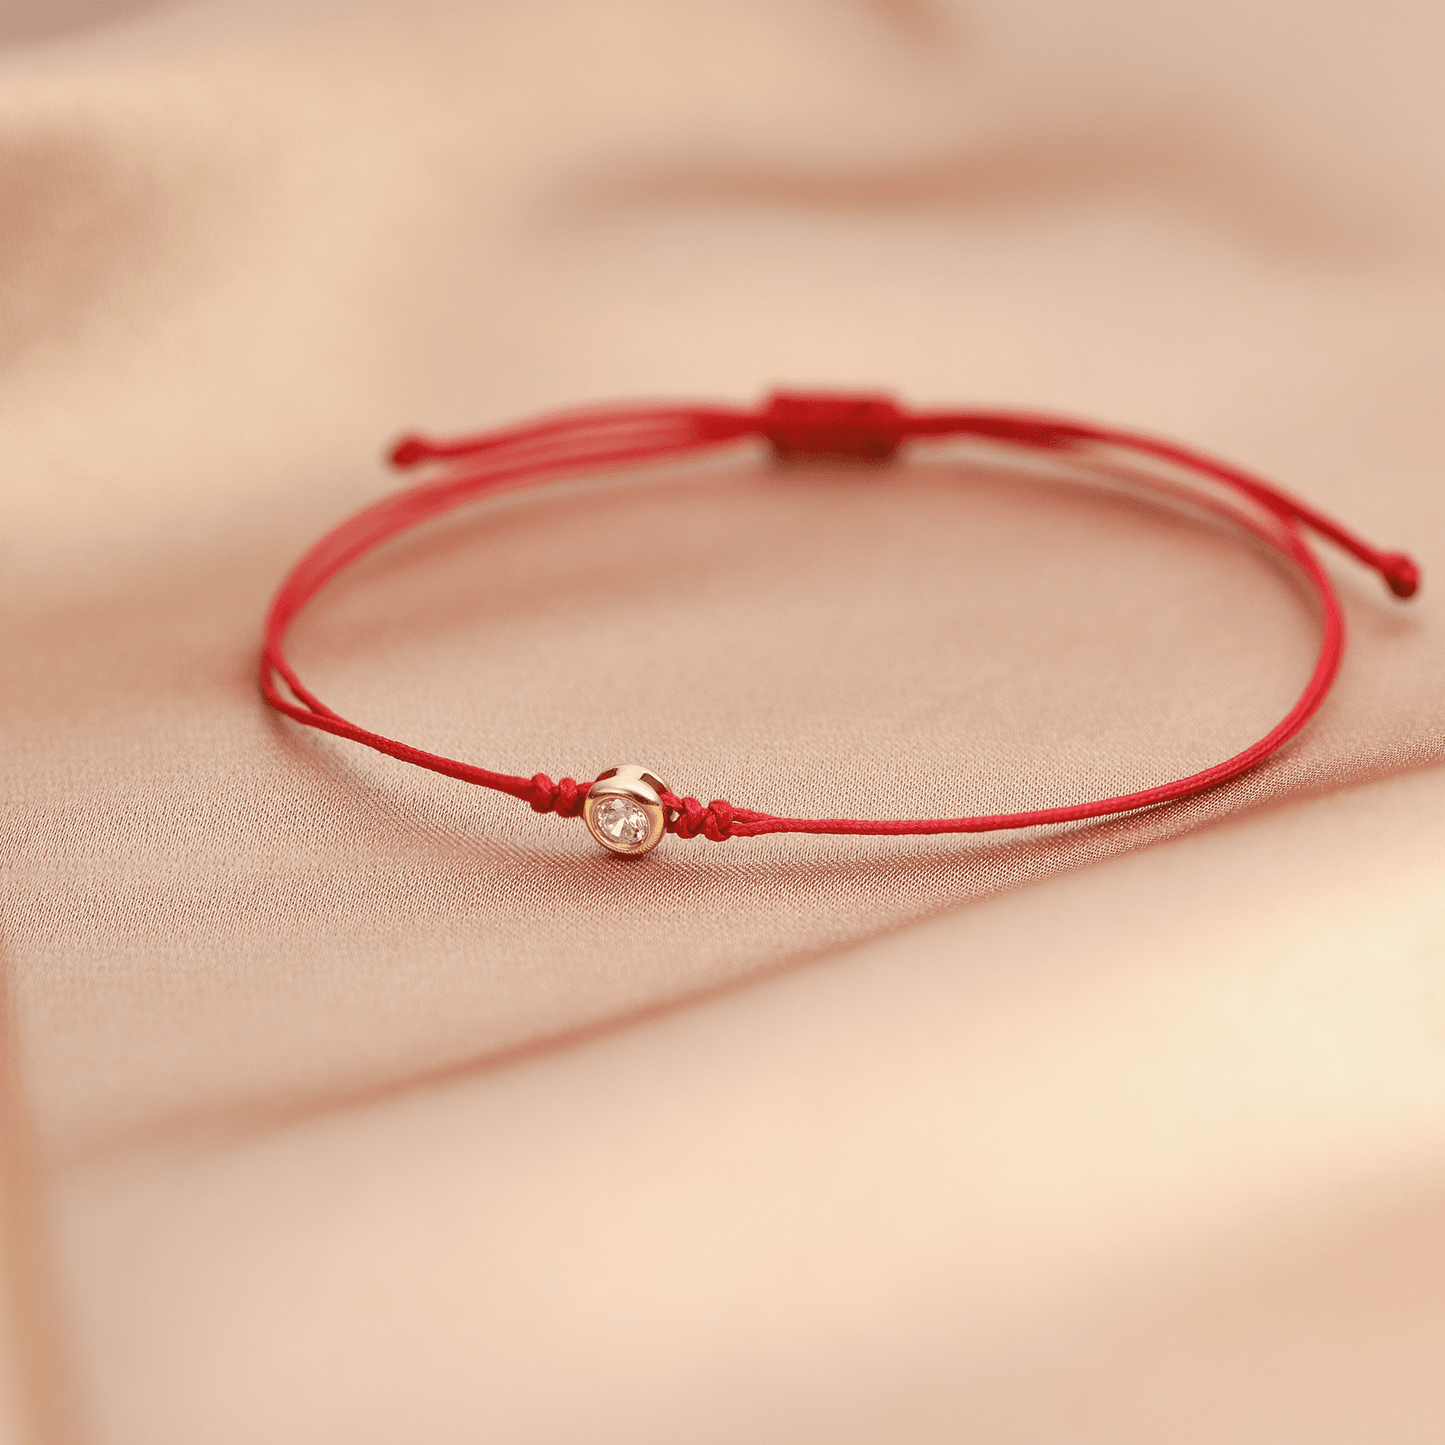 The Classic String of Love - 14K White Gold Bracelets 14K Solid Gold 